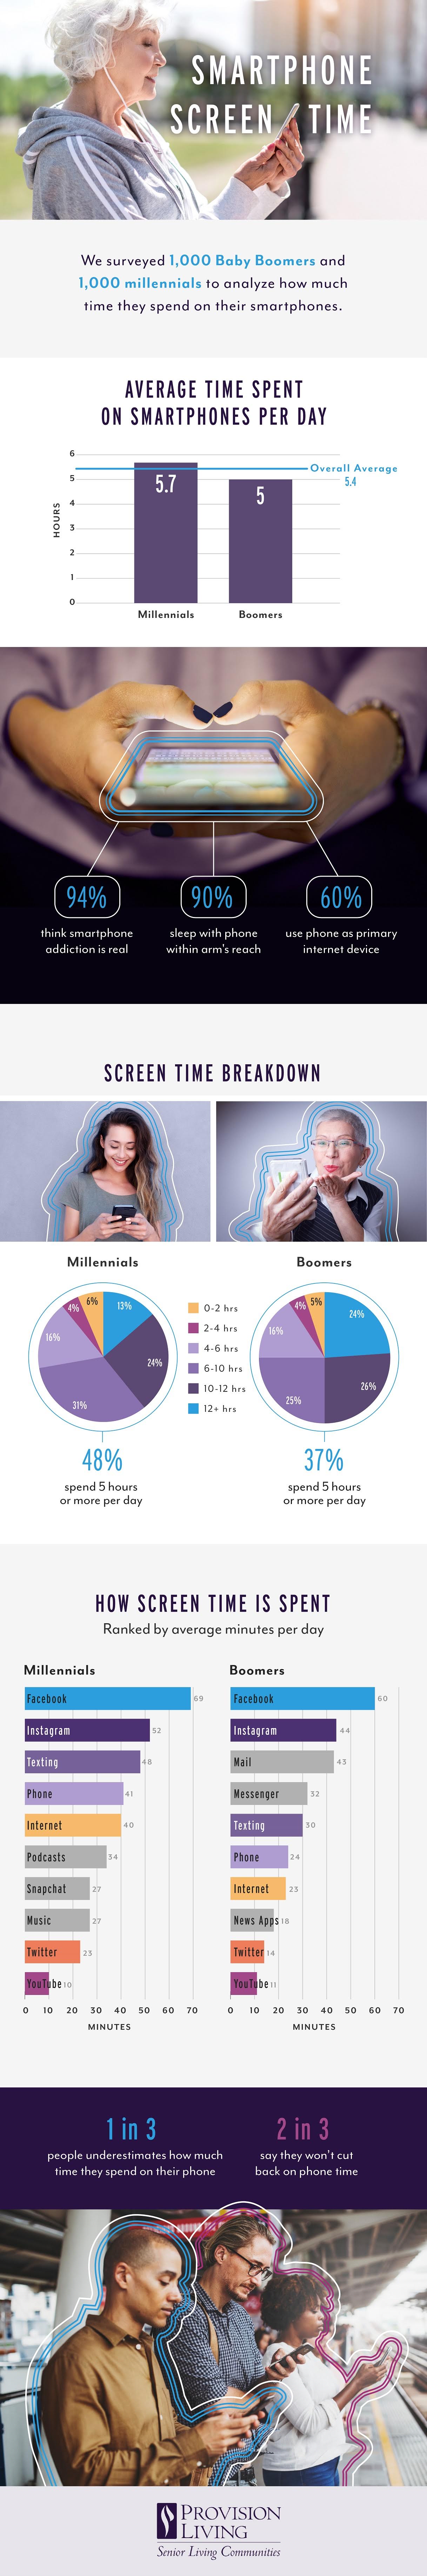 Smartphone Screen Time: Baby Boomers And Millennials #infographic